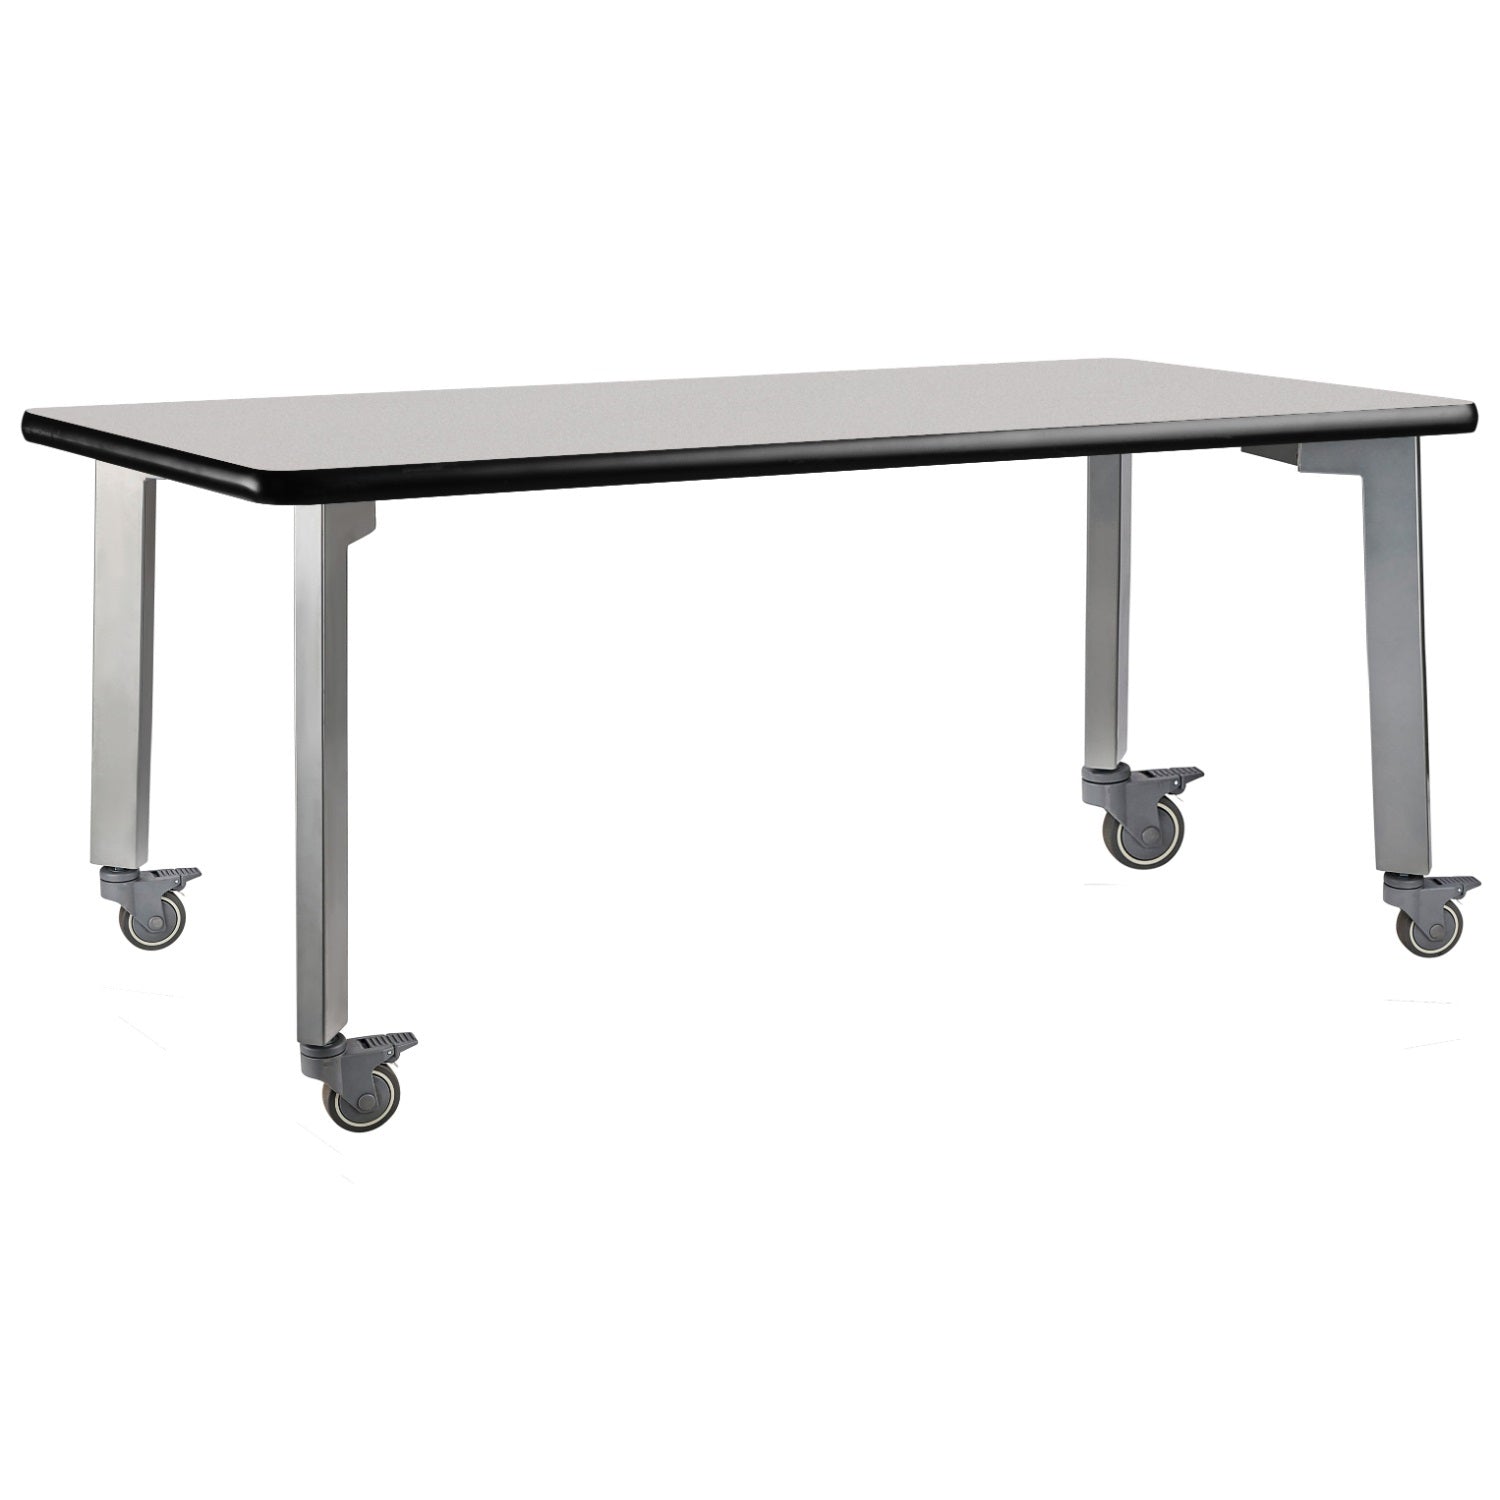 Titan Mobile Table, 36" x 84", Standard High Pressure Laminate Top with Particleboard Core and T-Mold Edge